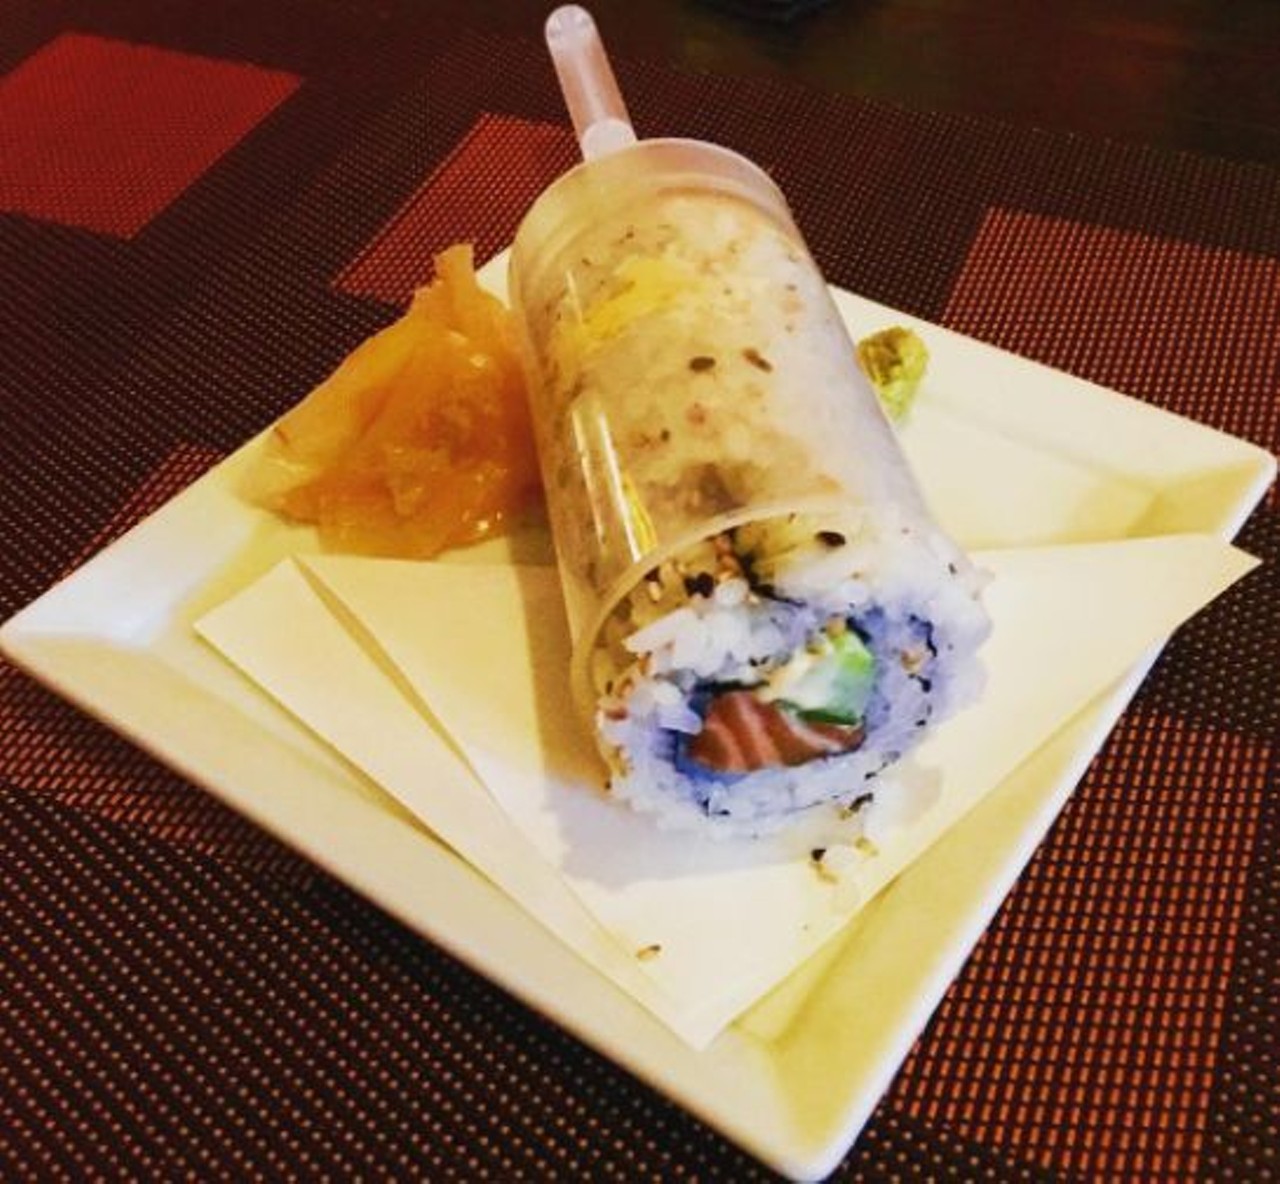  Sushi Pops at Dante
2247 Professor Ave. Suite C, 216-274-1200
Like the push-pops of your youth without the gooey orange mess, Dante's sushi pops are the perfect summer stick food when you're bored with traditional sushi rolls. Yes, sushi on a stick.
Photo via parkerjoewarren/Instagram